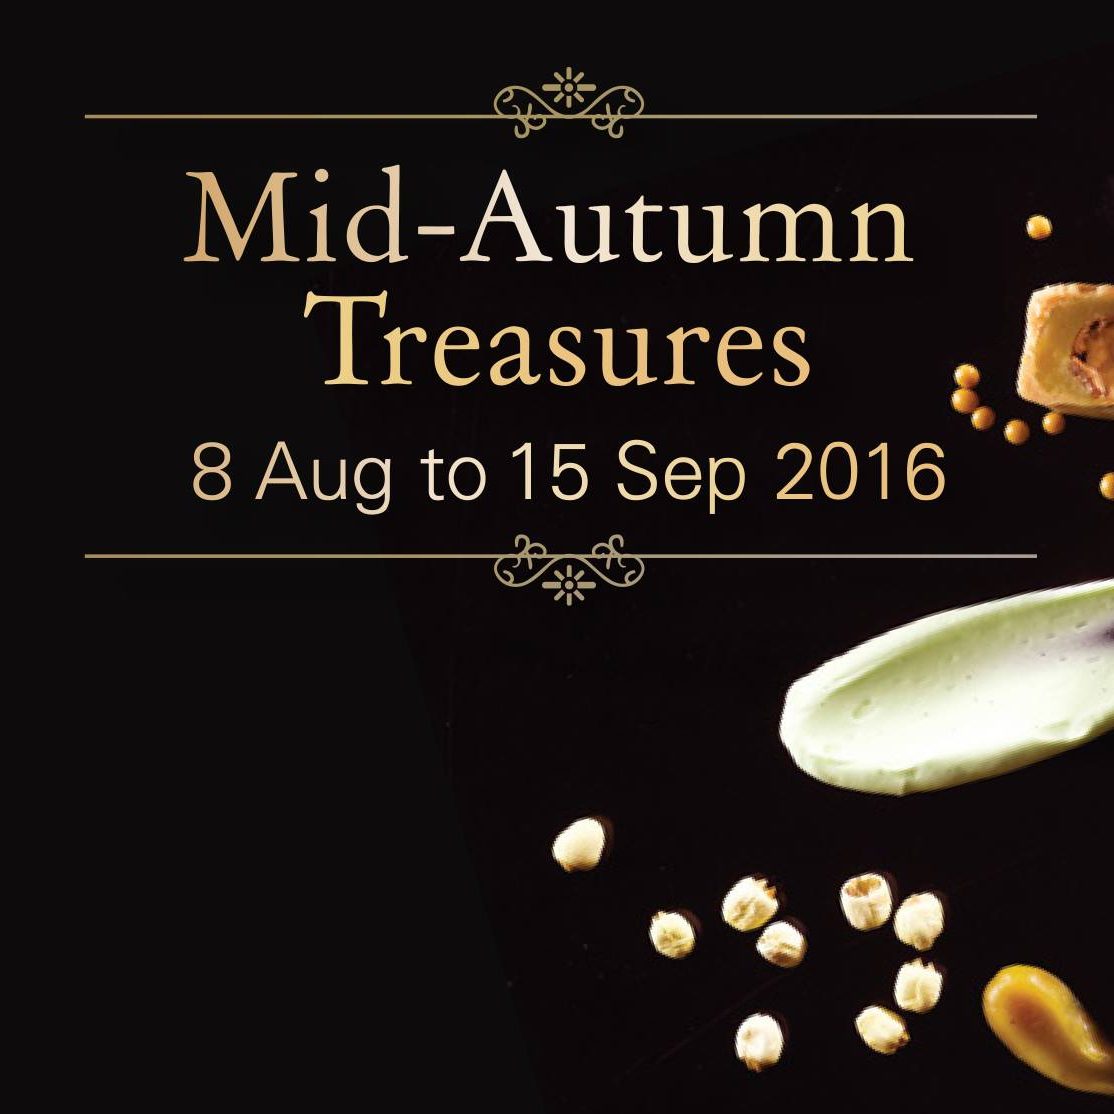 Hilton Singapore Mid-Autumn Treasures Up to 25% Off Mooncakes Promotion ends 15 Sep 2016